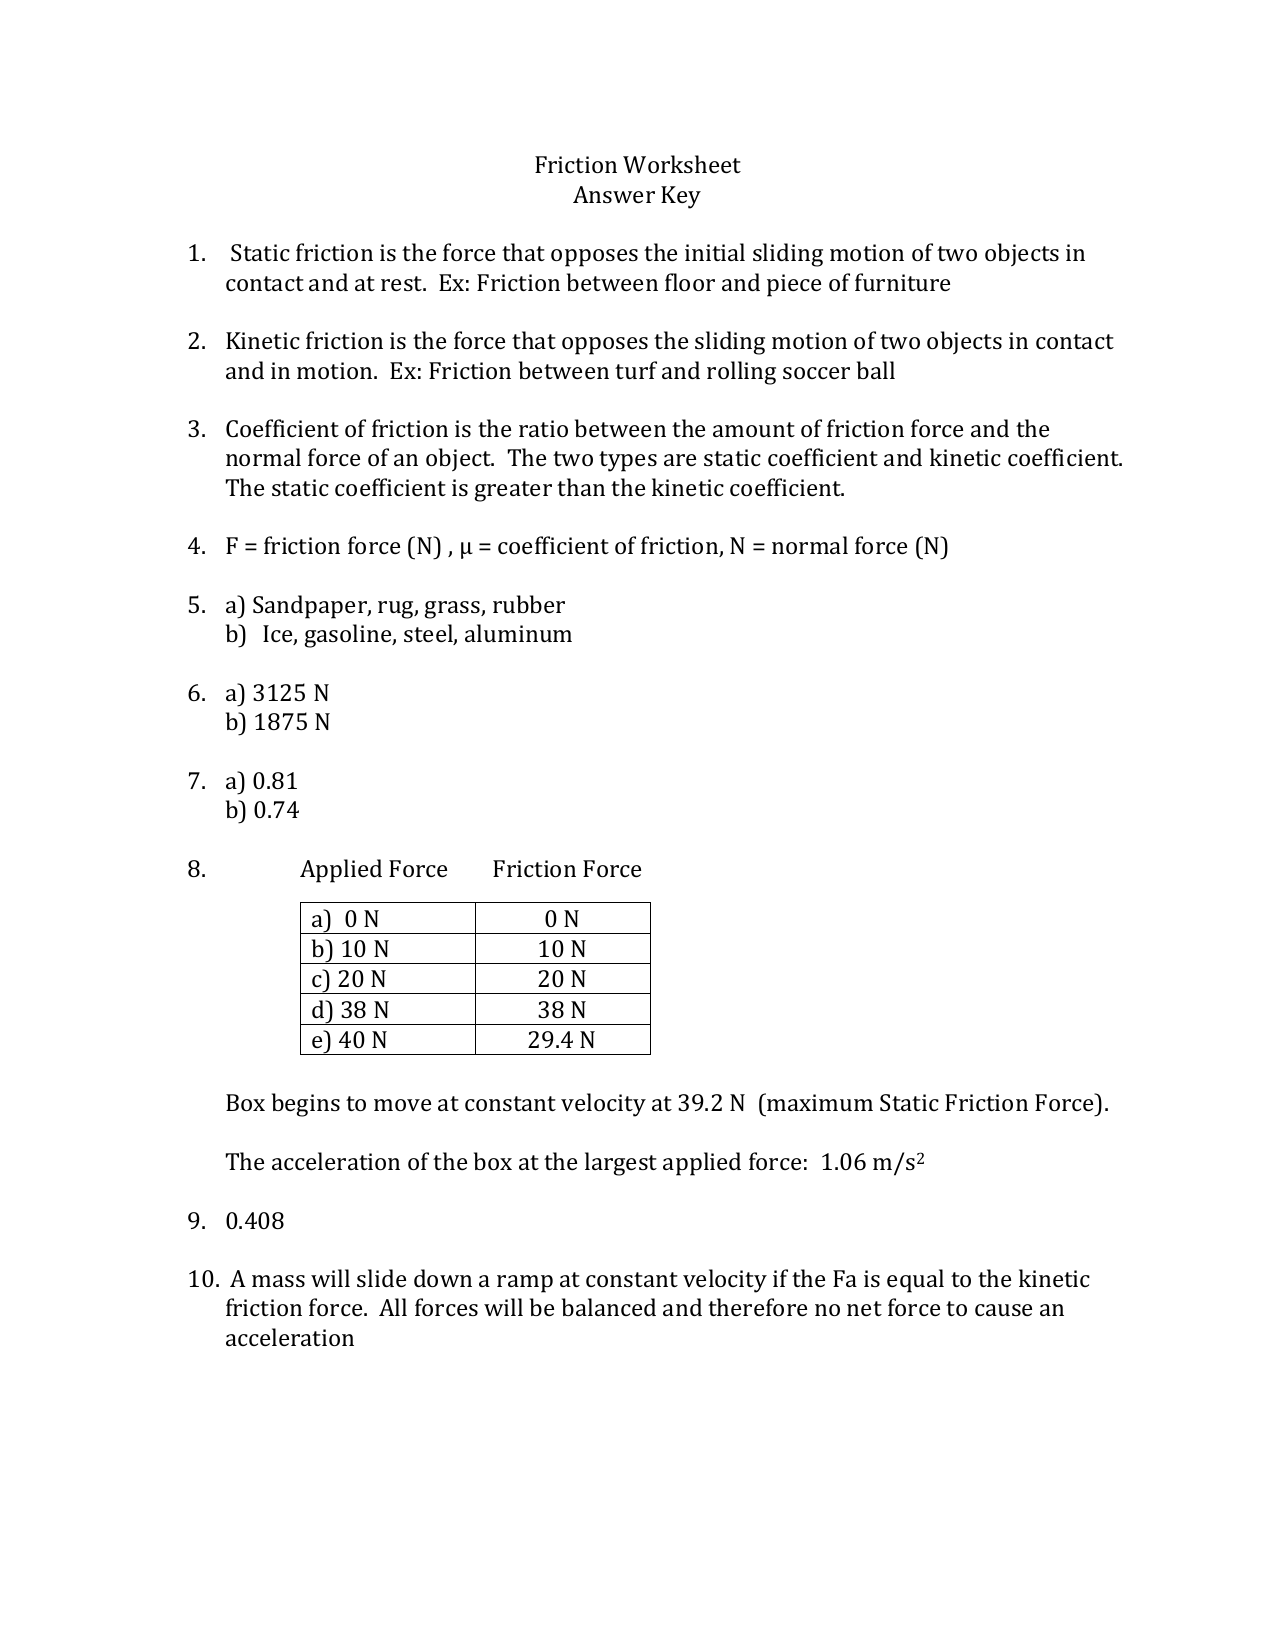 Friction Worksheet Answer Key Static friction is the force that Inside Coefficient Of Friction Worksheet Answers